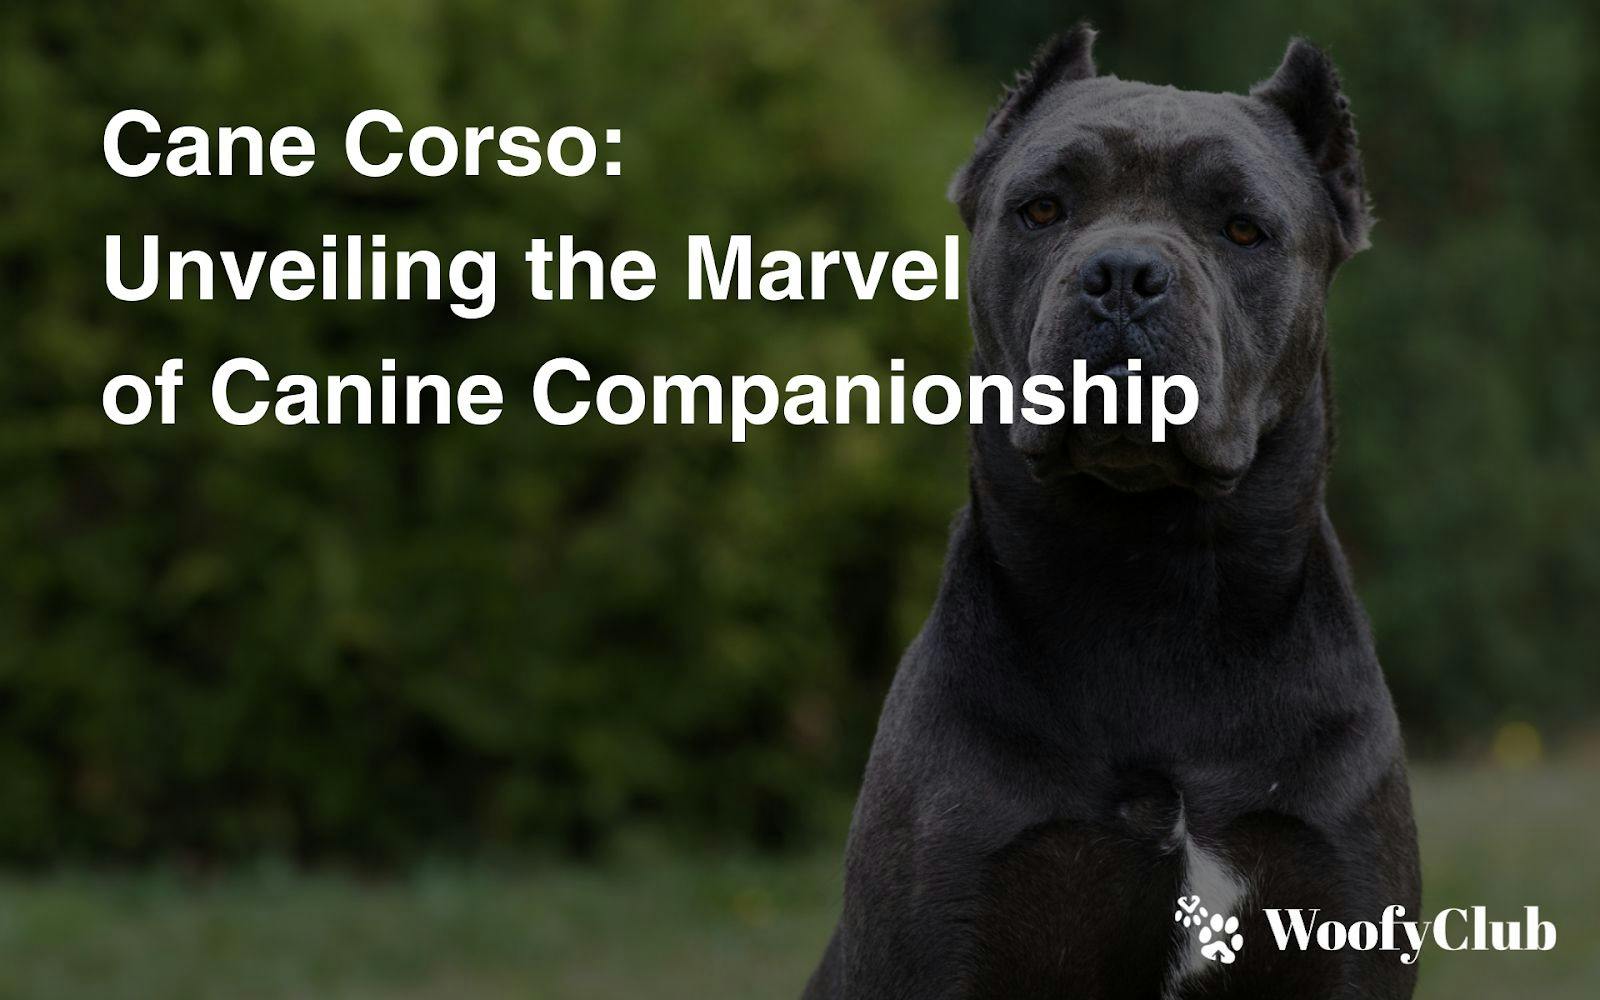 Cane Corso: Unveiling The Marvel Of Canine Companionship